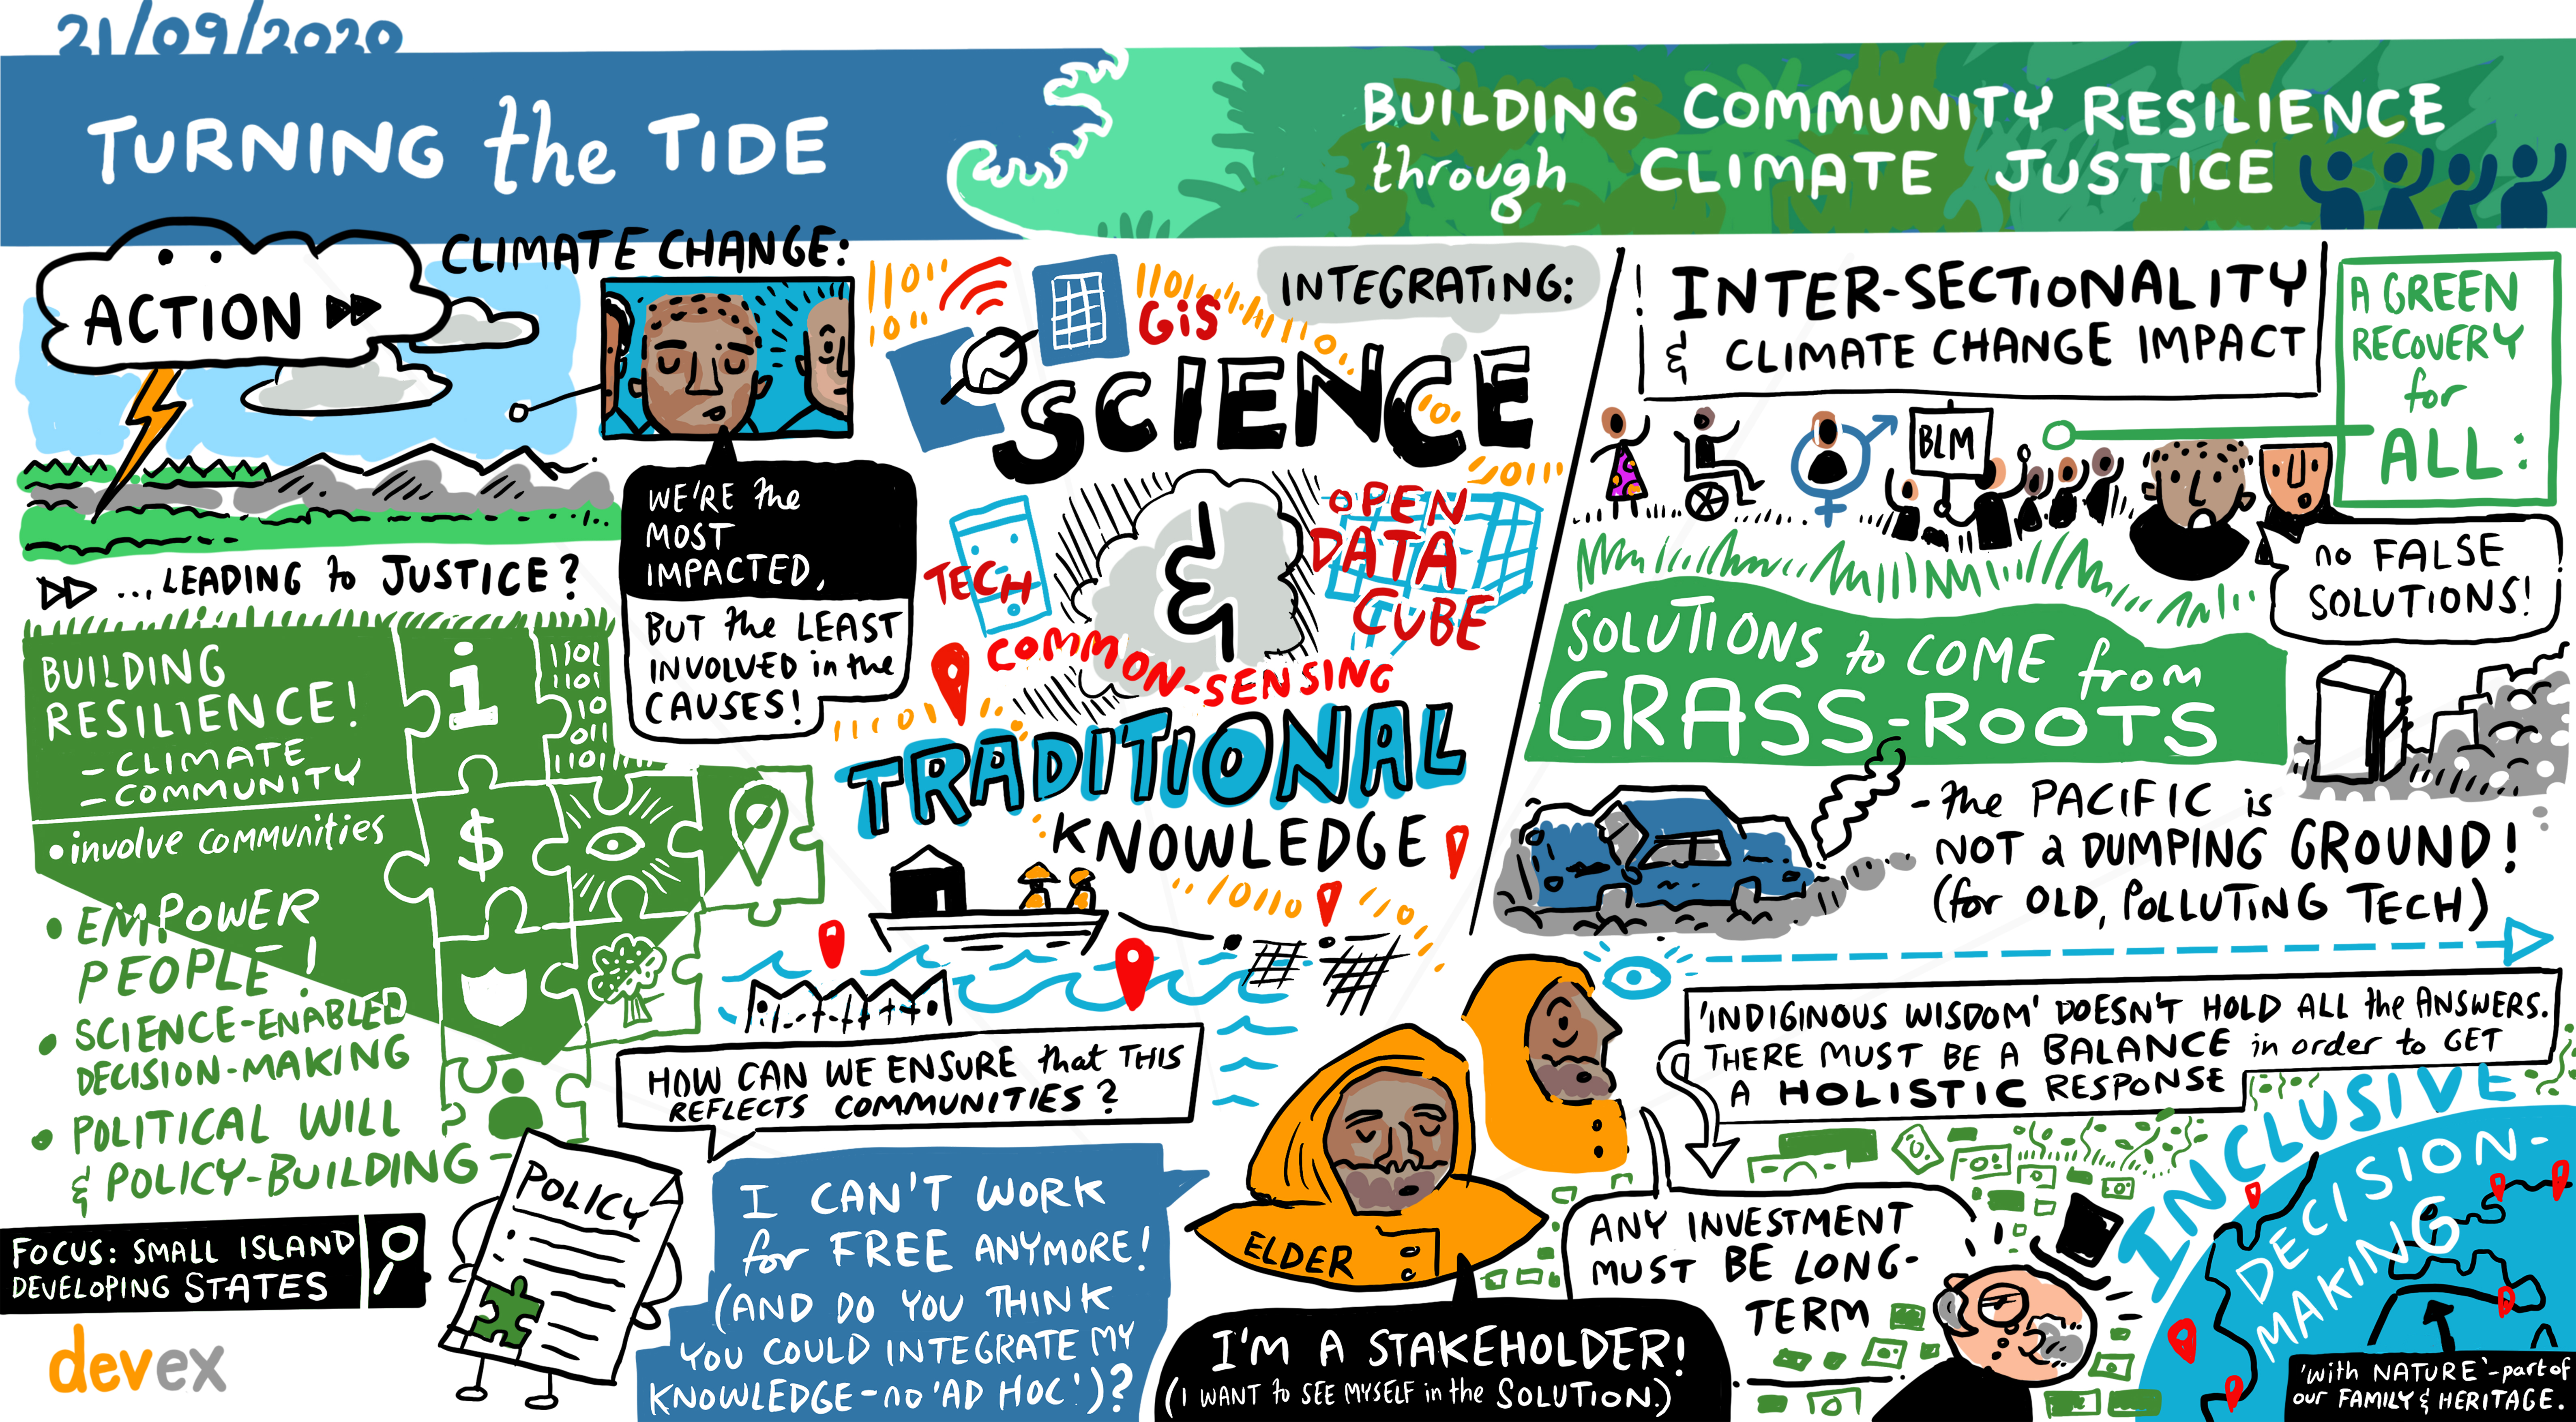 21092020_Devex_Turning_the_Tide_resilience_through_climate_justice.jpg